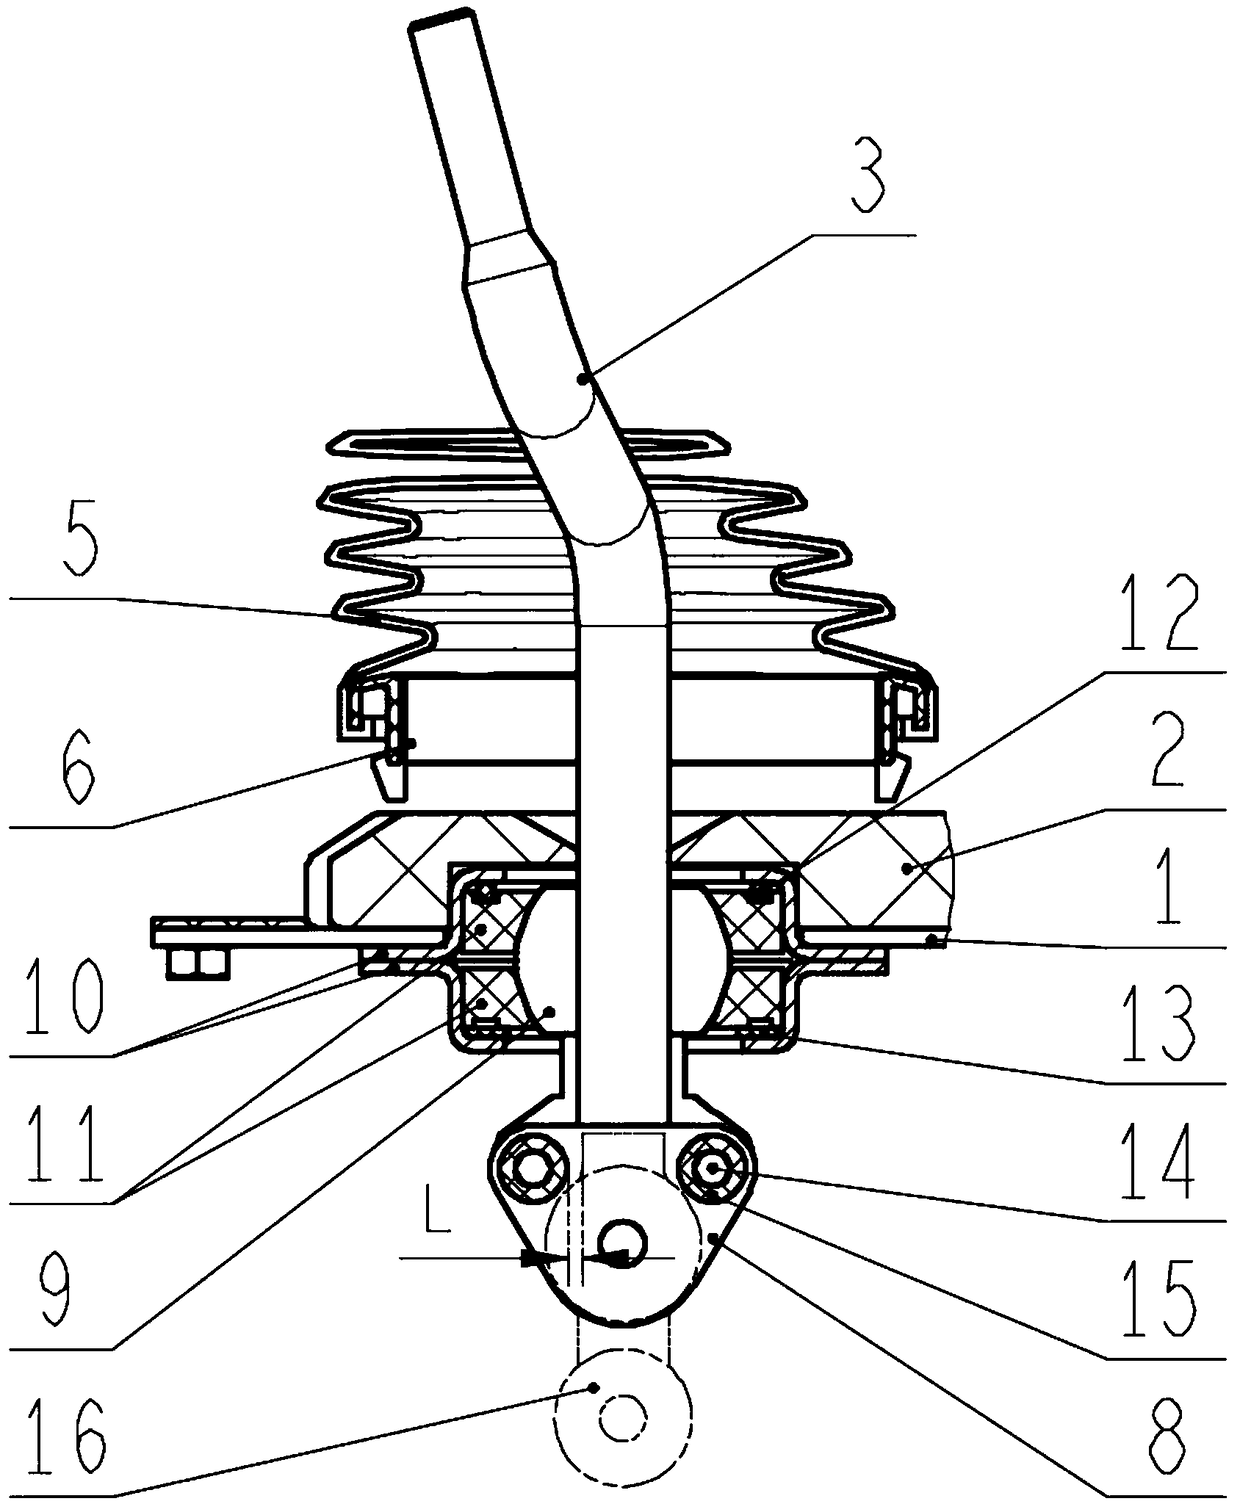 Variable-speed manipulator assembly